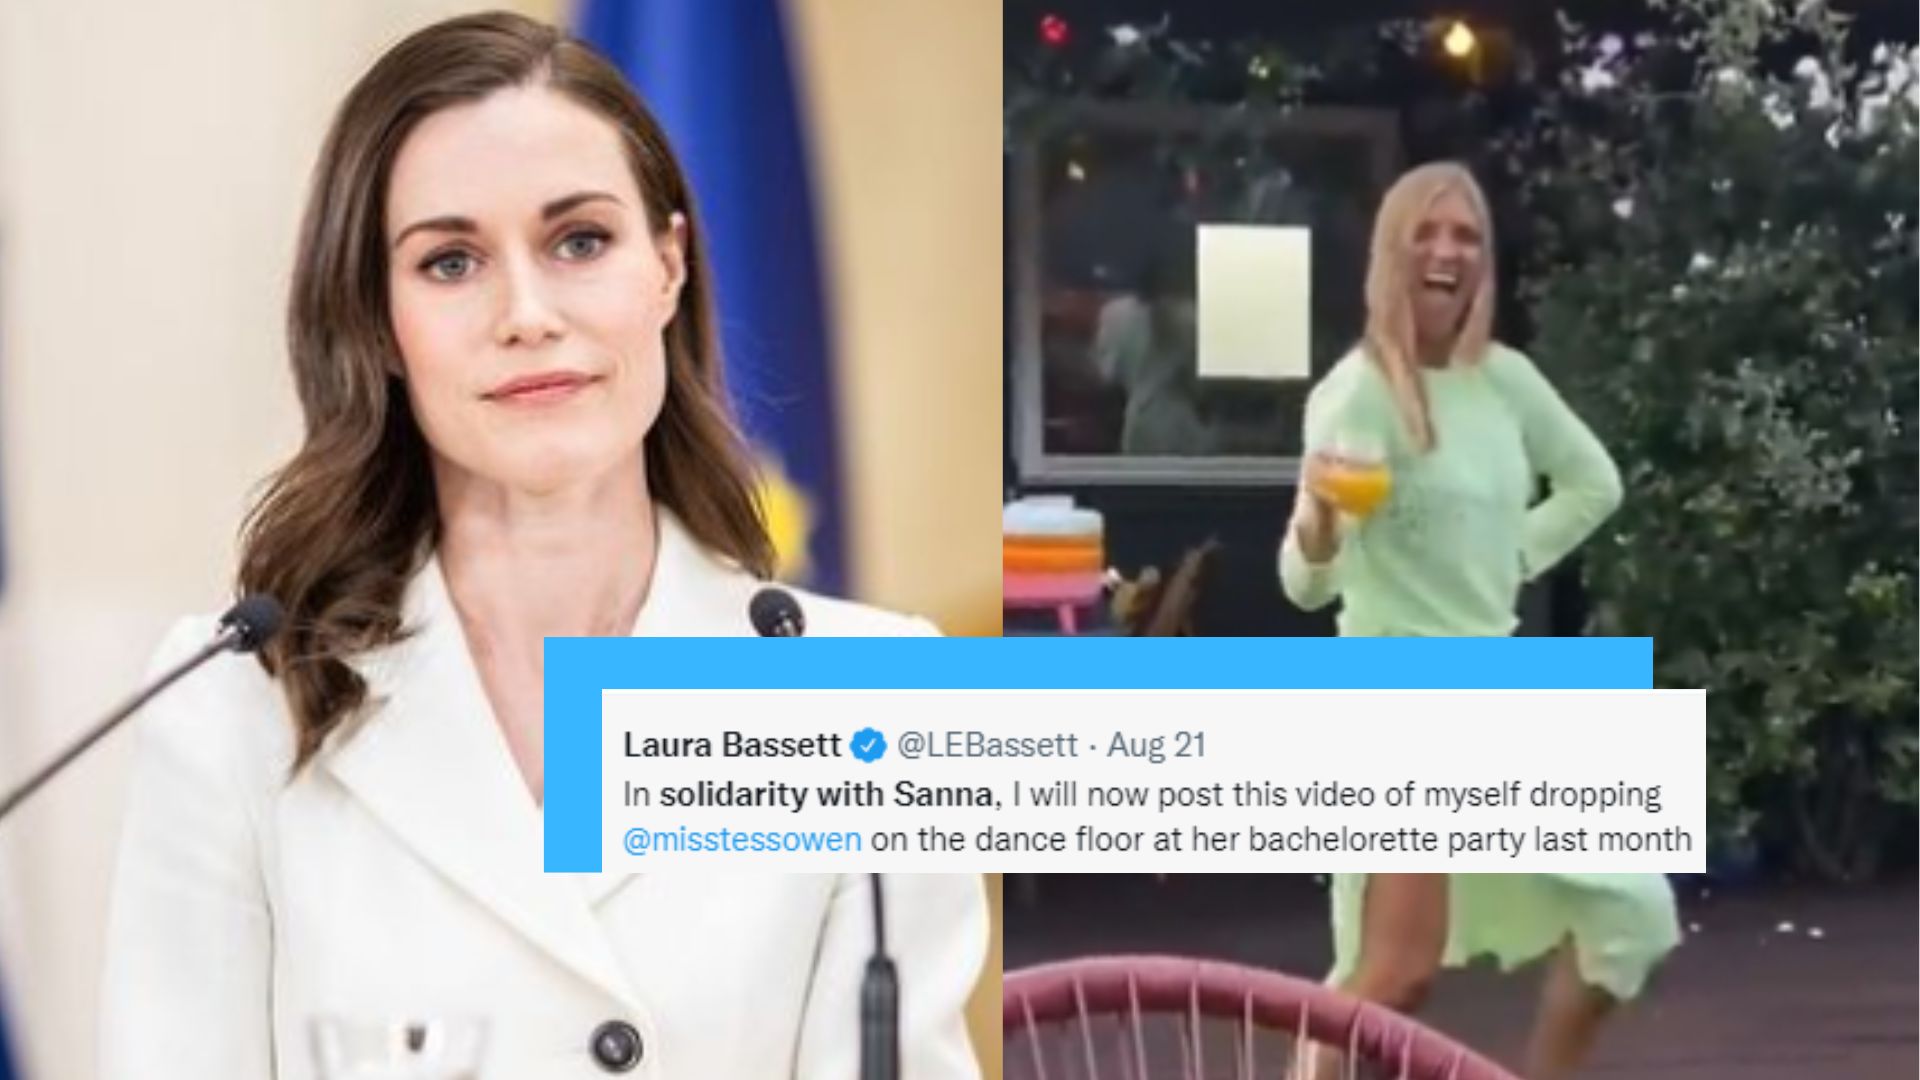 Finnish Women Have Found A Fun Way To Support Sanna Marin Amidst Backlash Over Her Recent Party Video